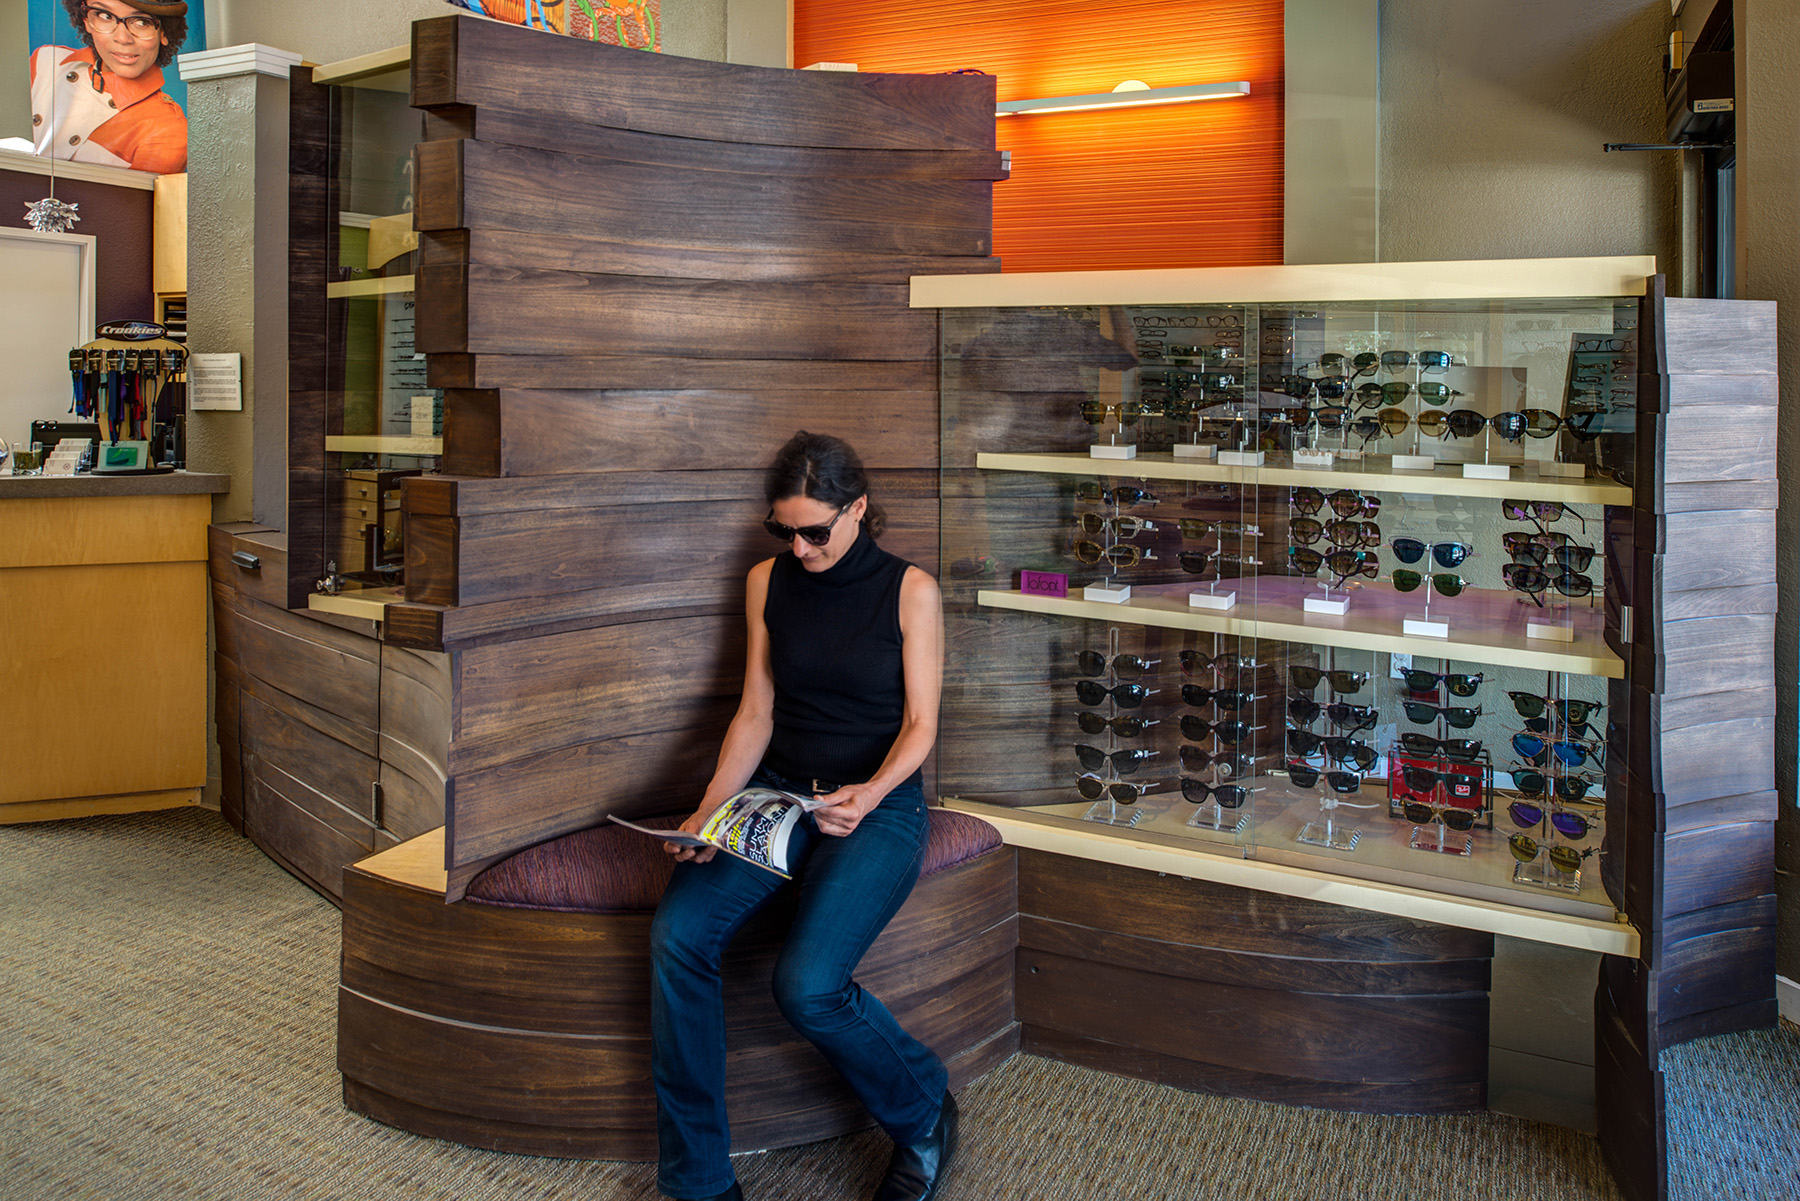  Design and fabrication of bentwood display case/ seating for optometry practice and store in Oakland. 